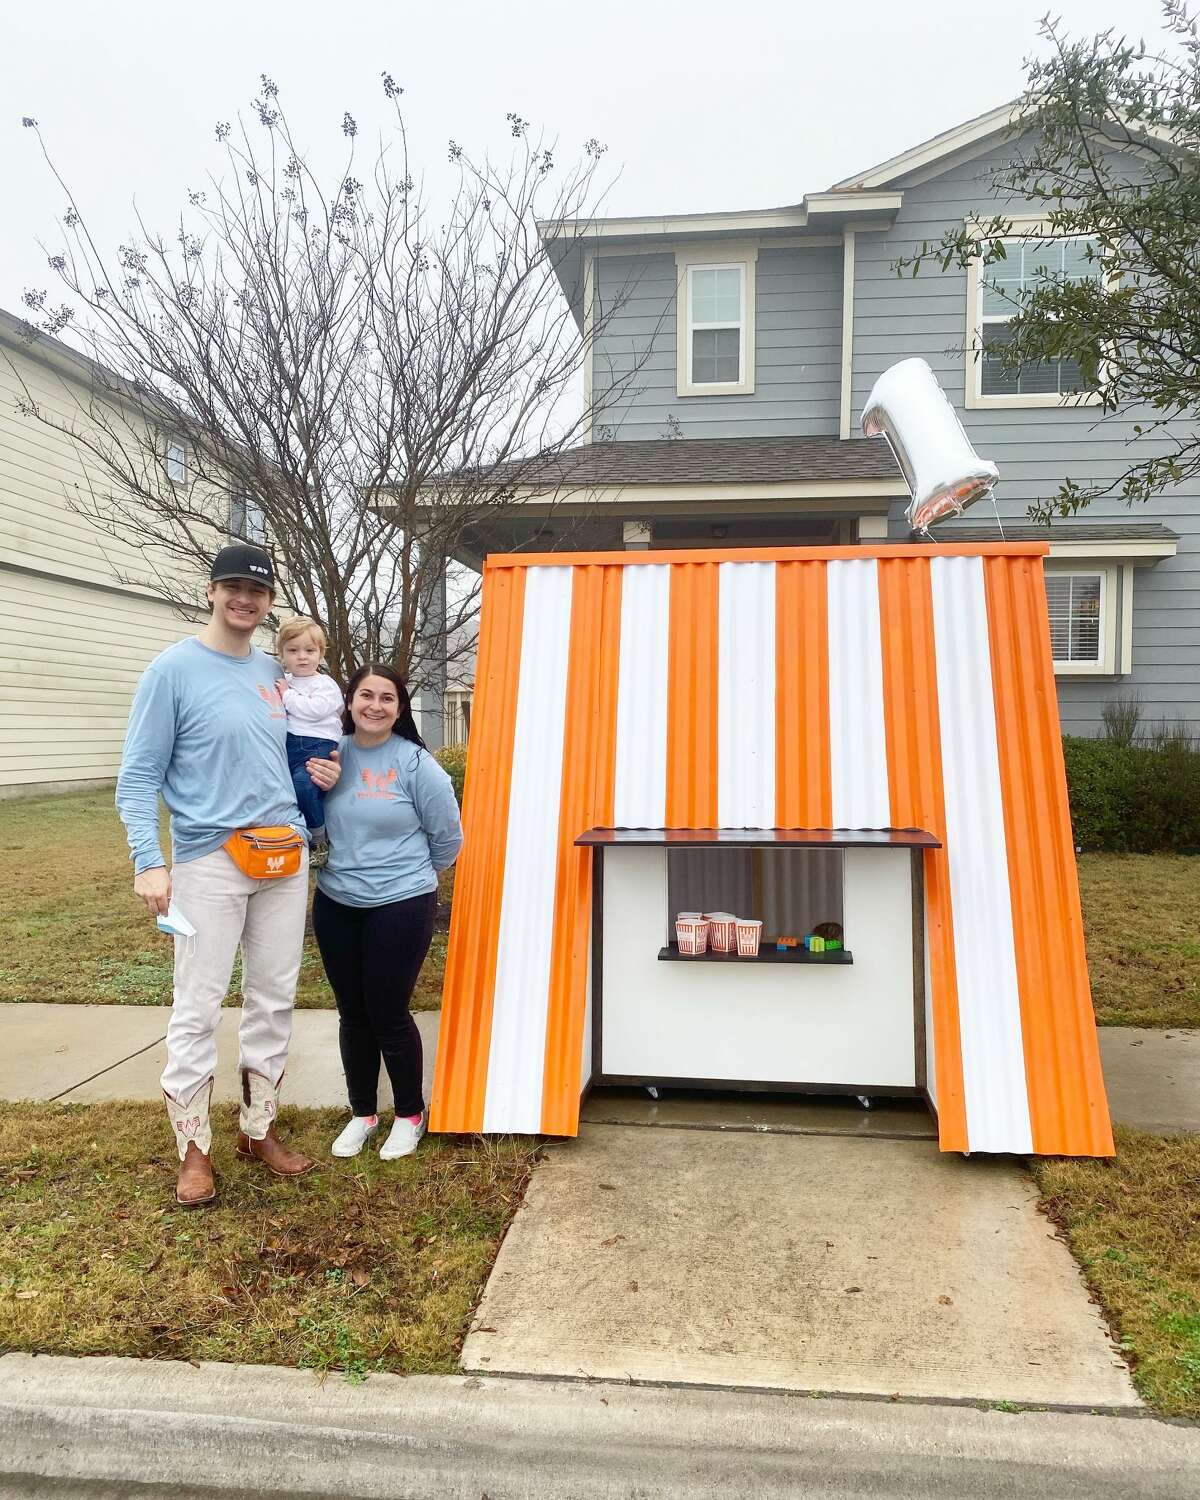 Danae and Ian Klingspor from Pflugerville (Northeast of Austin) build a more than 6-foot Whataburger playhouse for their baby's first birthday on Jan. 24.